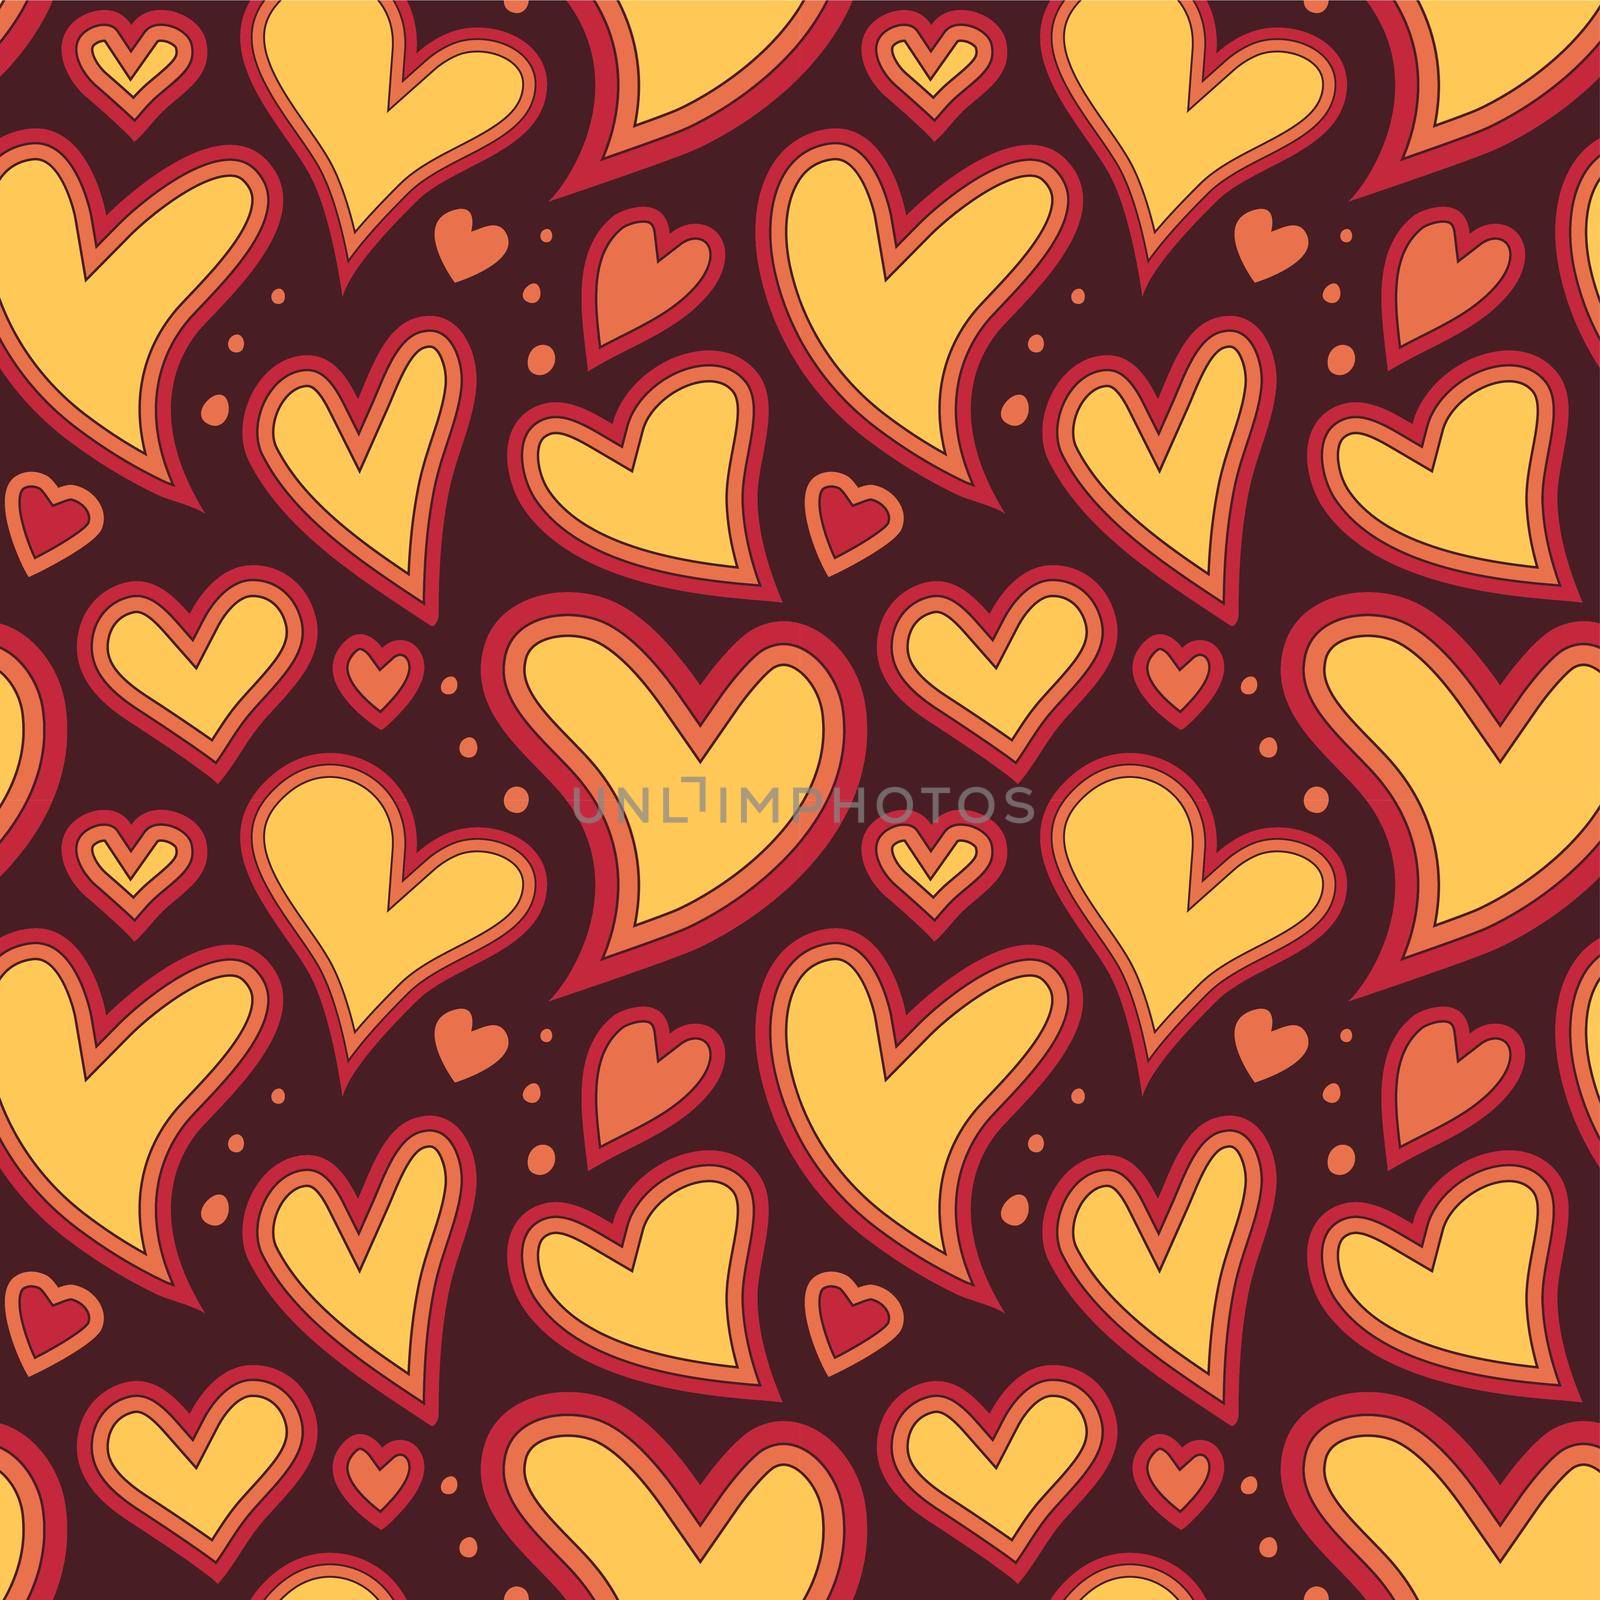 Red, orange, and yellow 70s-style psychedelic hearts and dots on a brown background. Seamless repeating background. Vector illustration.